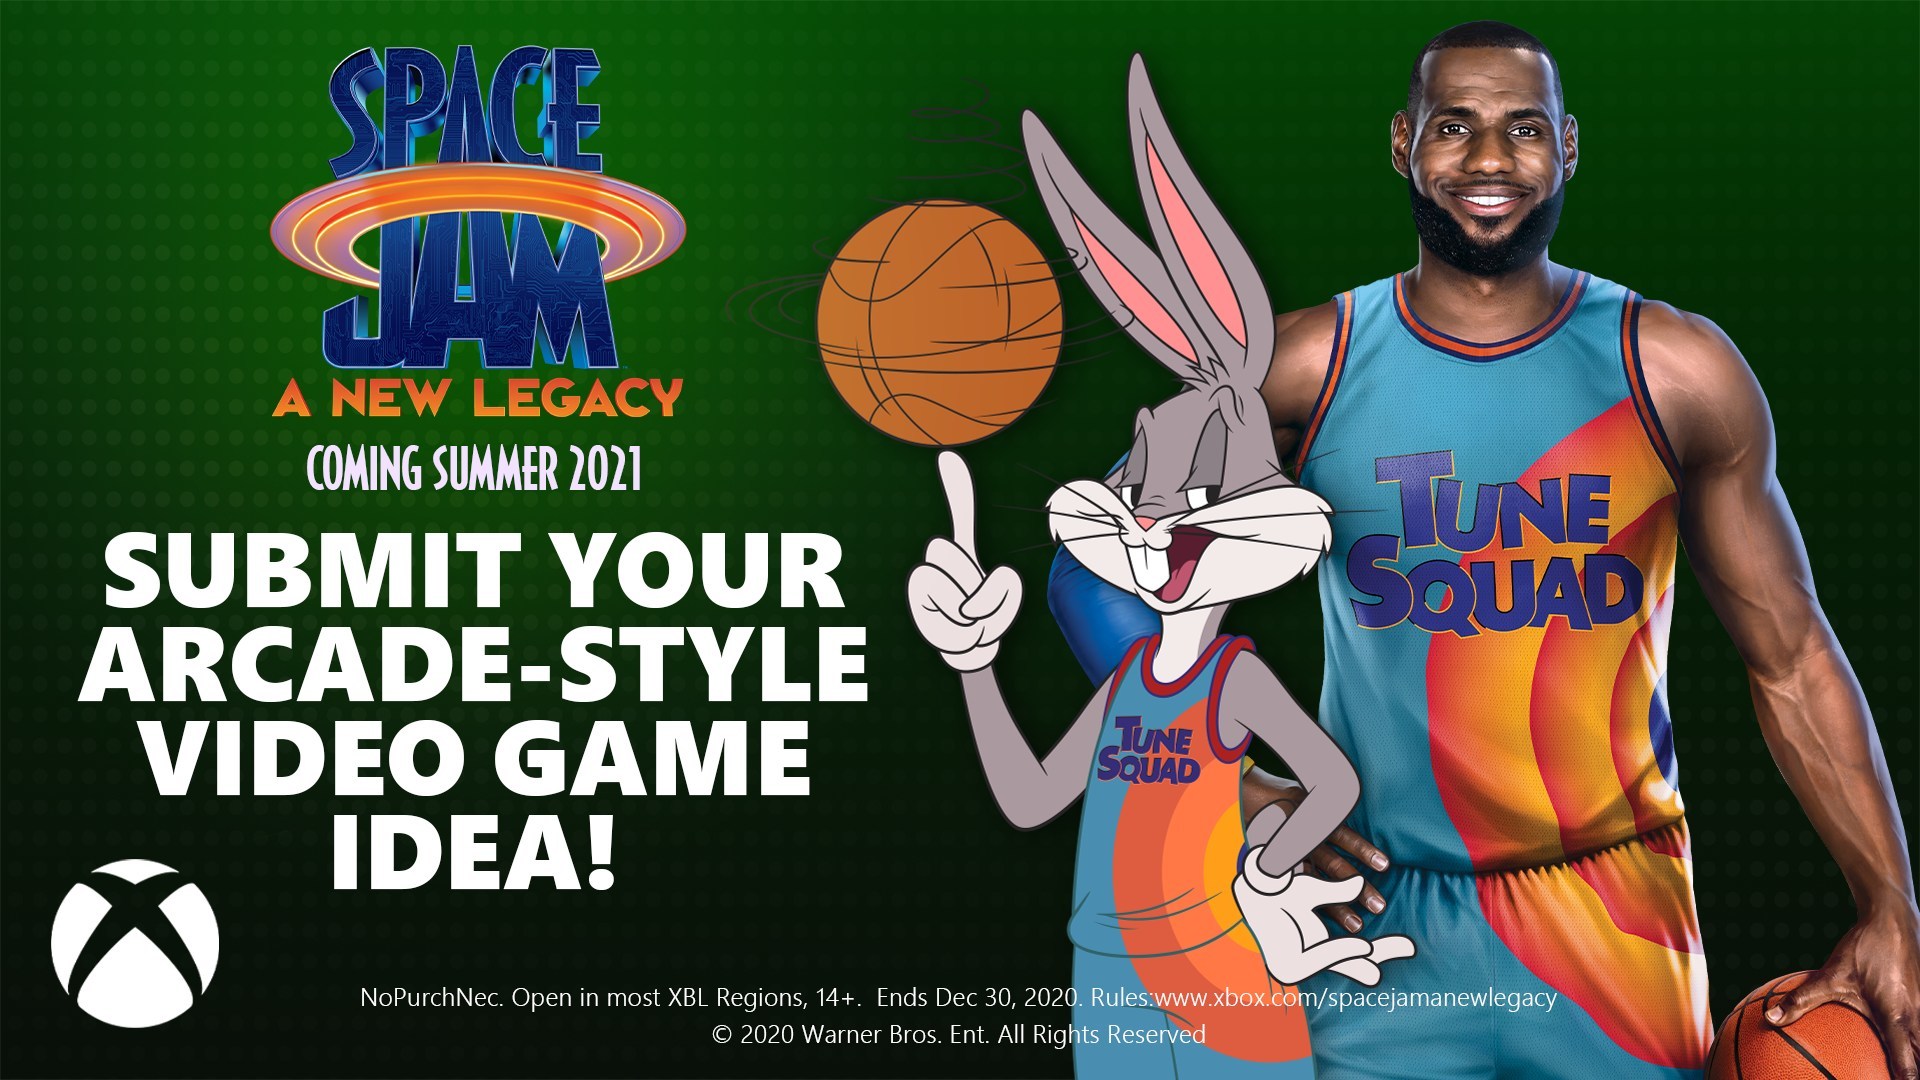 LeBron James & Bugs Bunny Debut Posters For 'Space Jam: A New